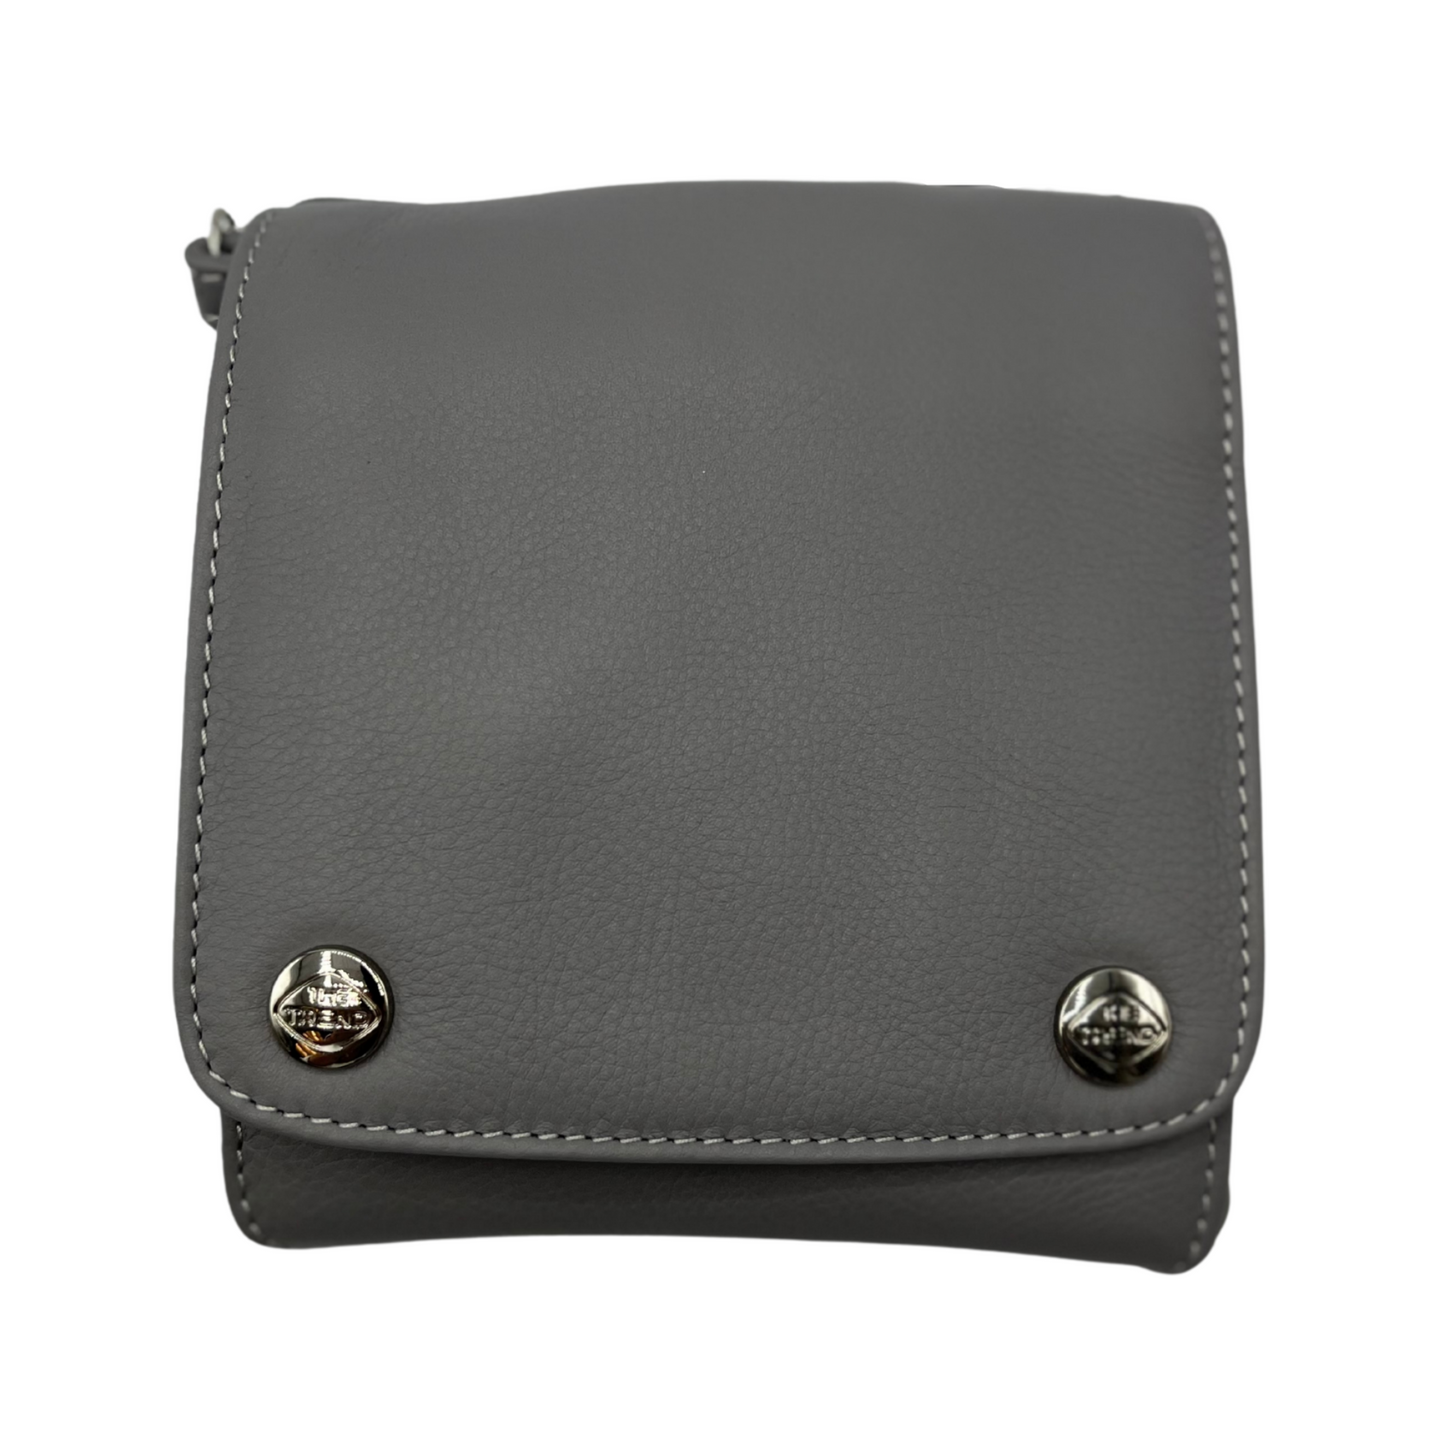 The front of a dark grey leather bag, with a square face and two shiny silver metal buttons, each bearing "The Trend" logo.